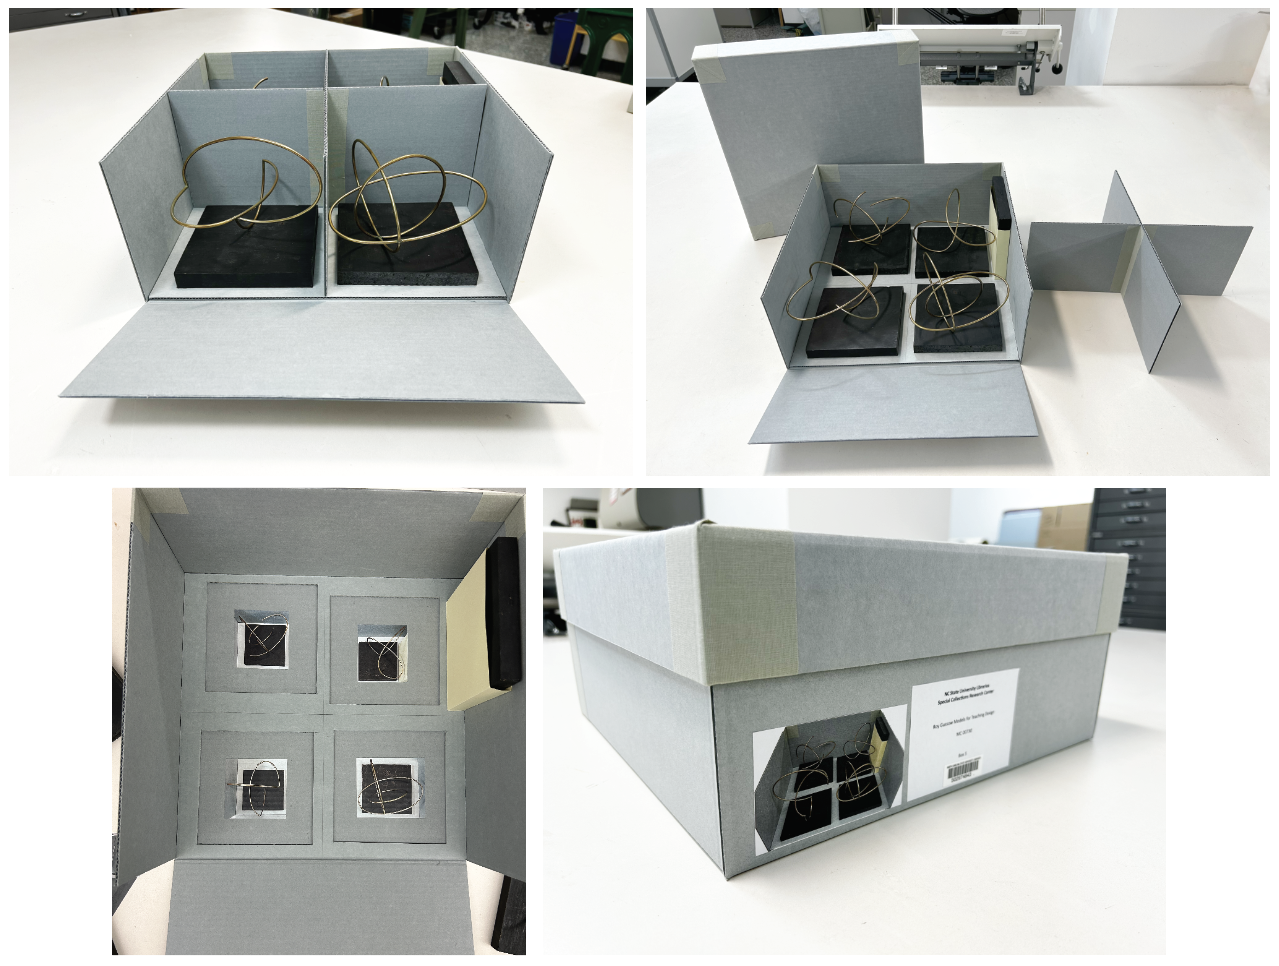 Models made of wire extended over their bases and swiveled. They required specific placement to secure them inside their new box, which is indicated by photos in the base.